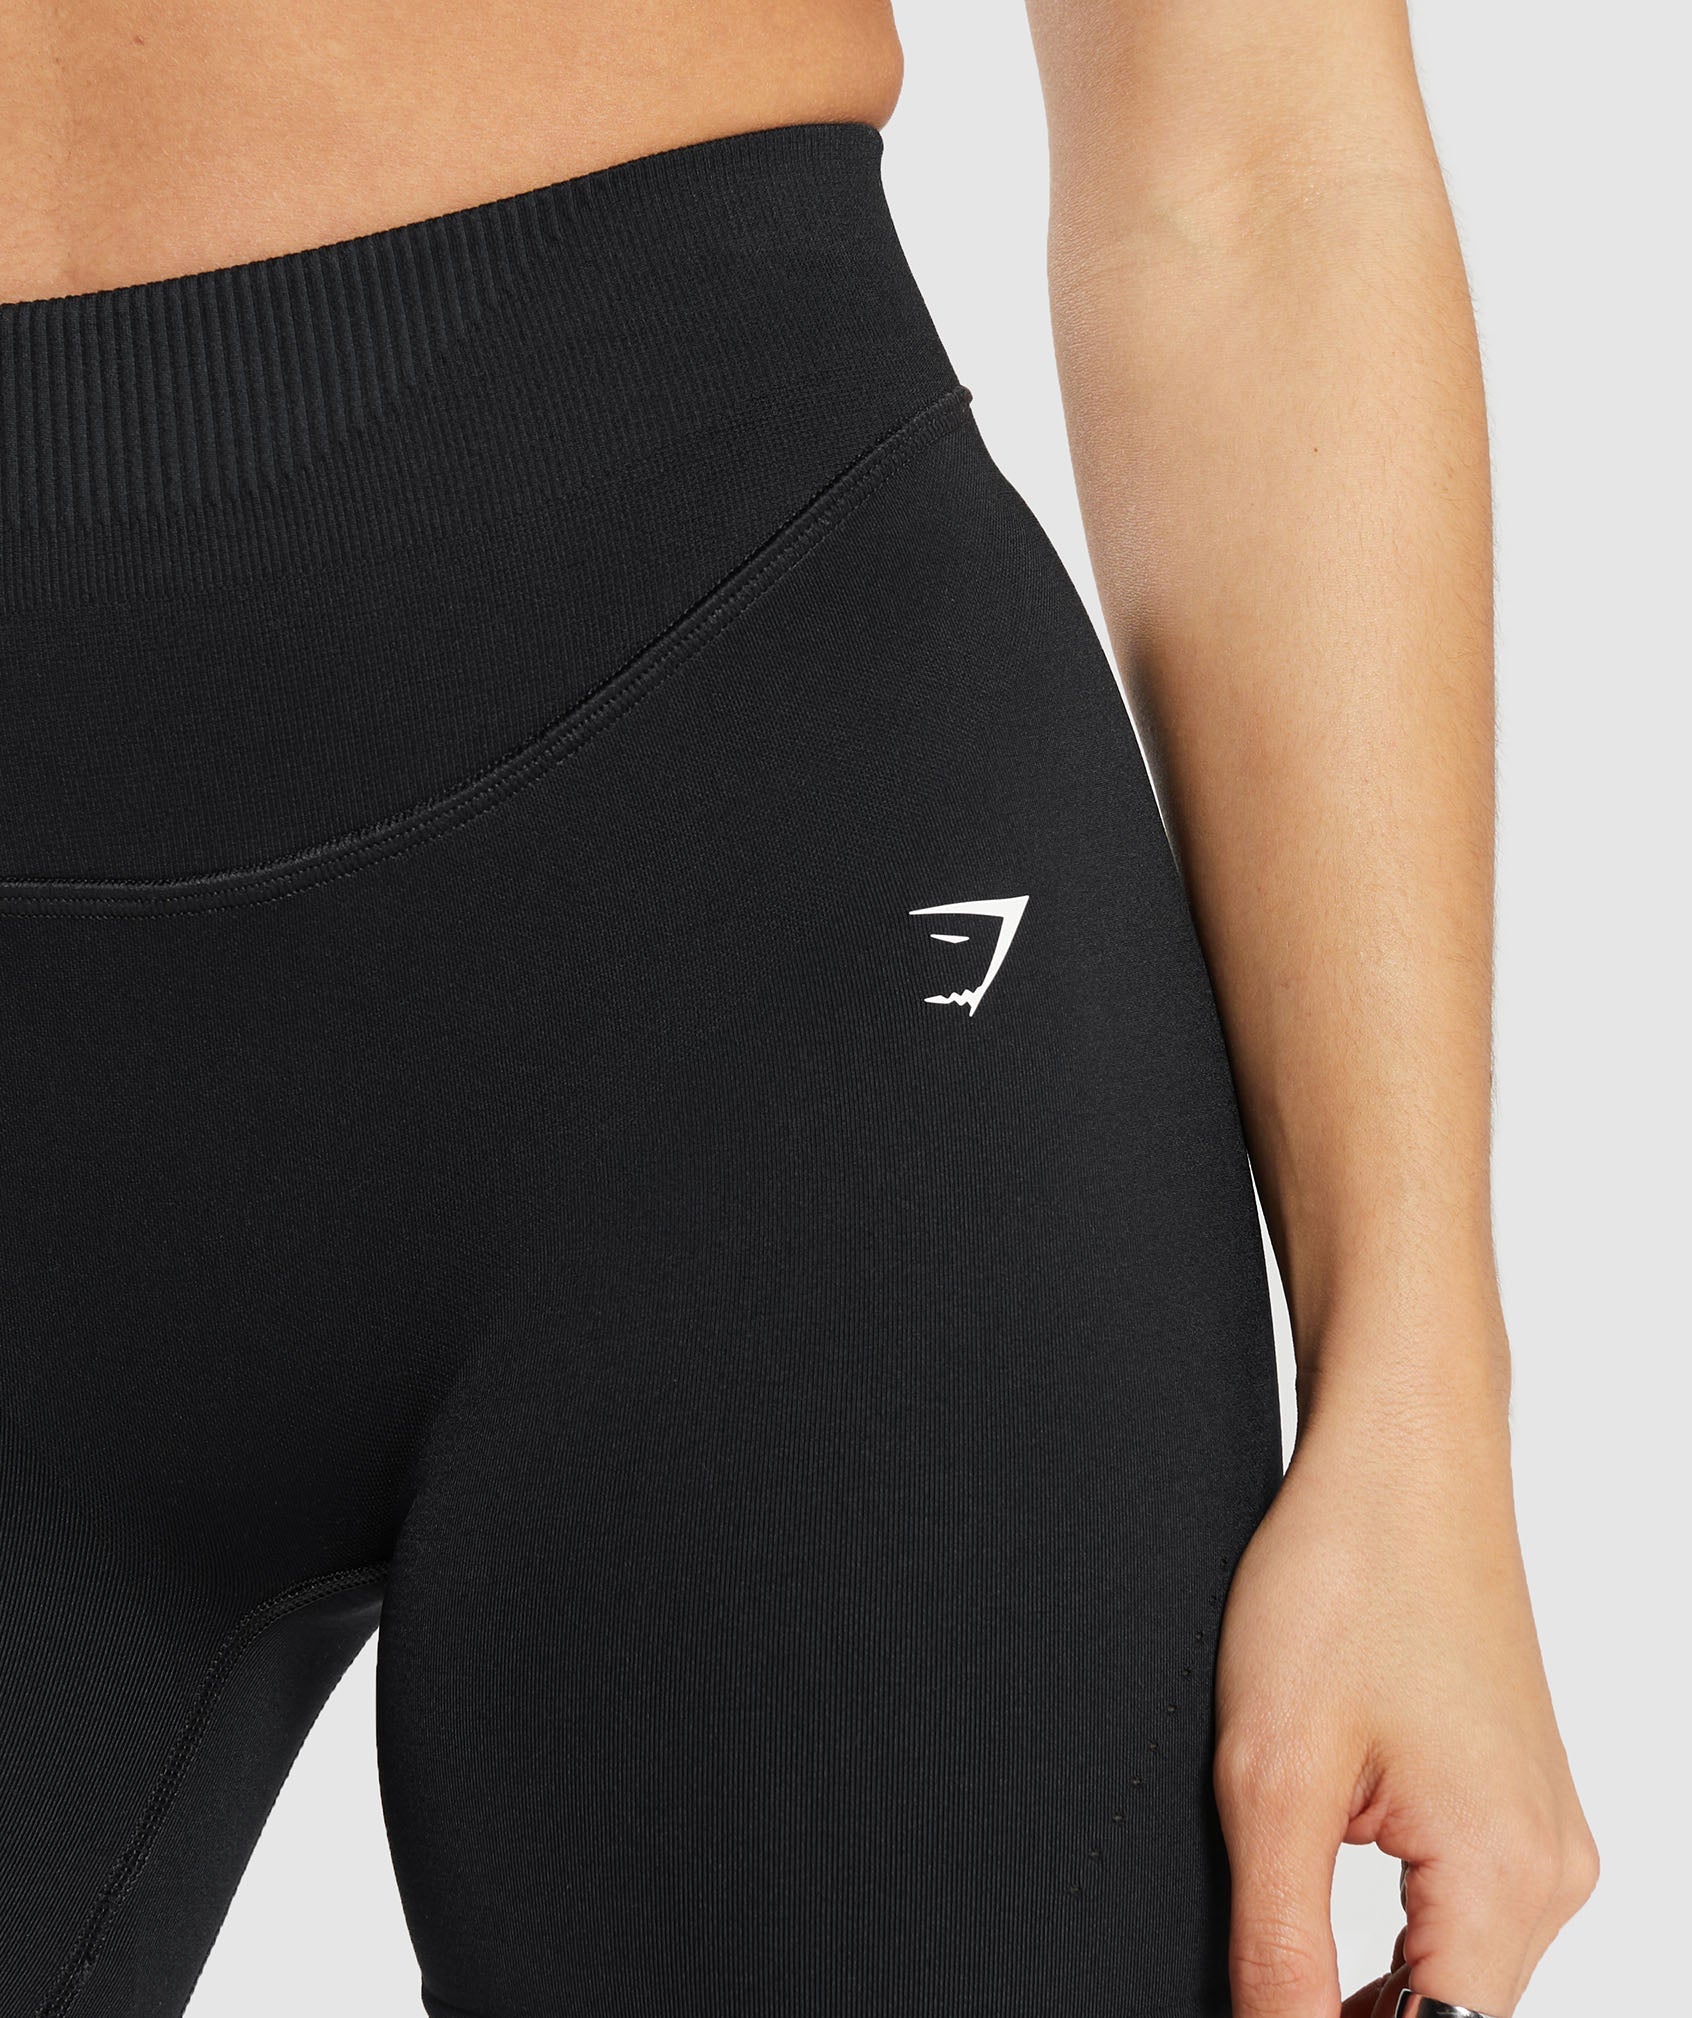 Sweat Seamless Shorts in Black - view 6